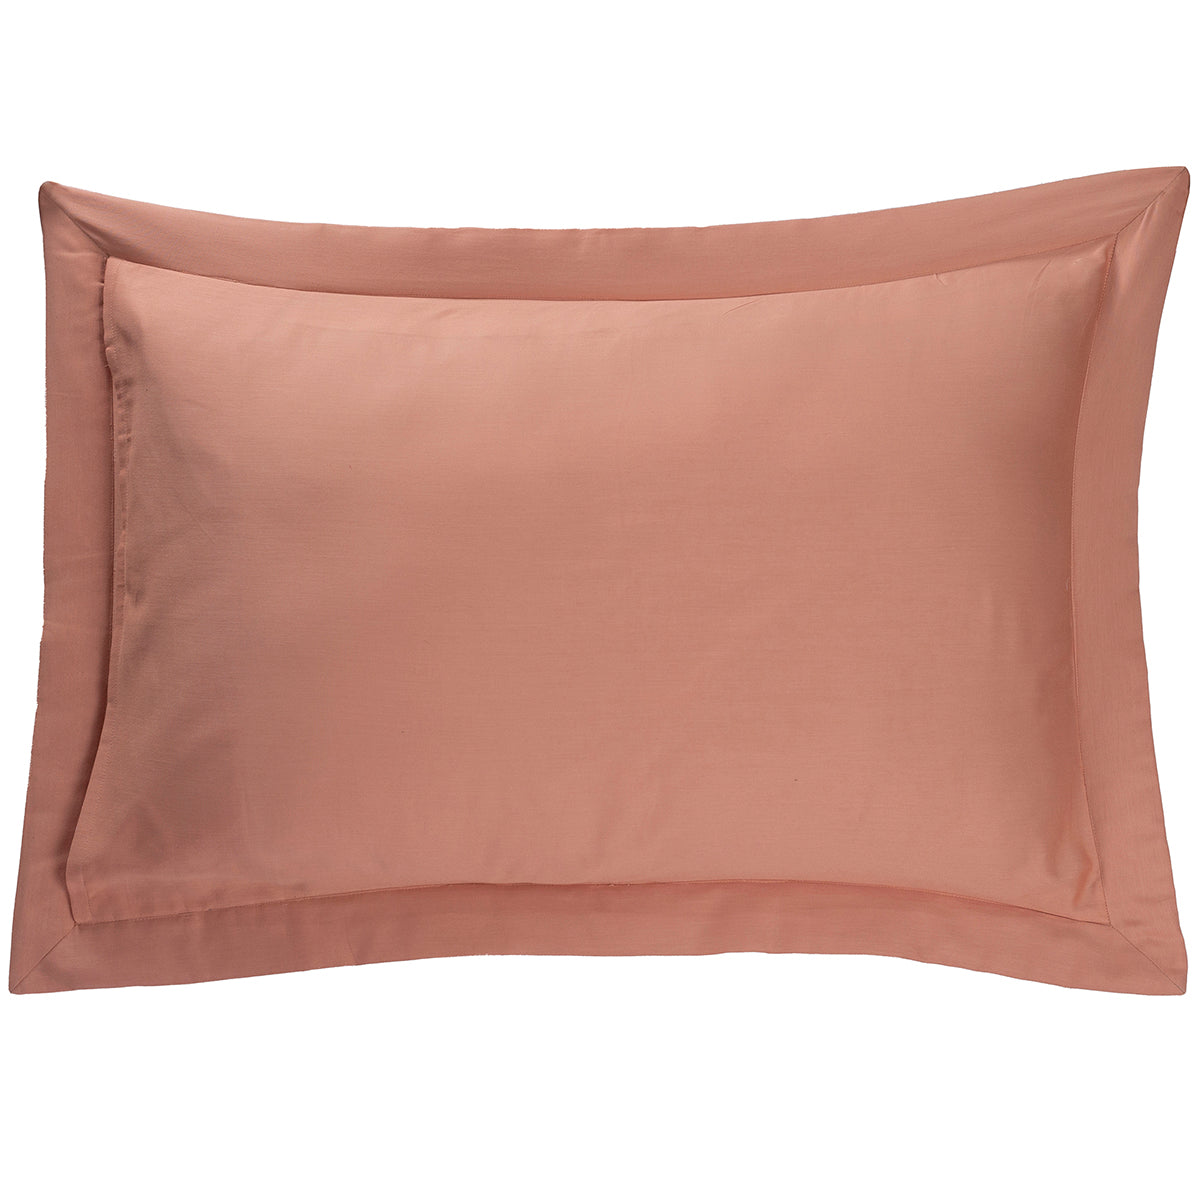 Global Atelier Petal Touch Peach Machine Quilted 2PC Pillow Sham Set